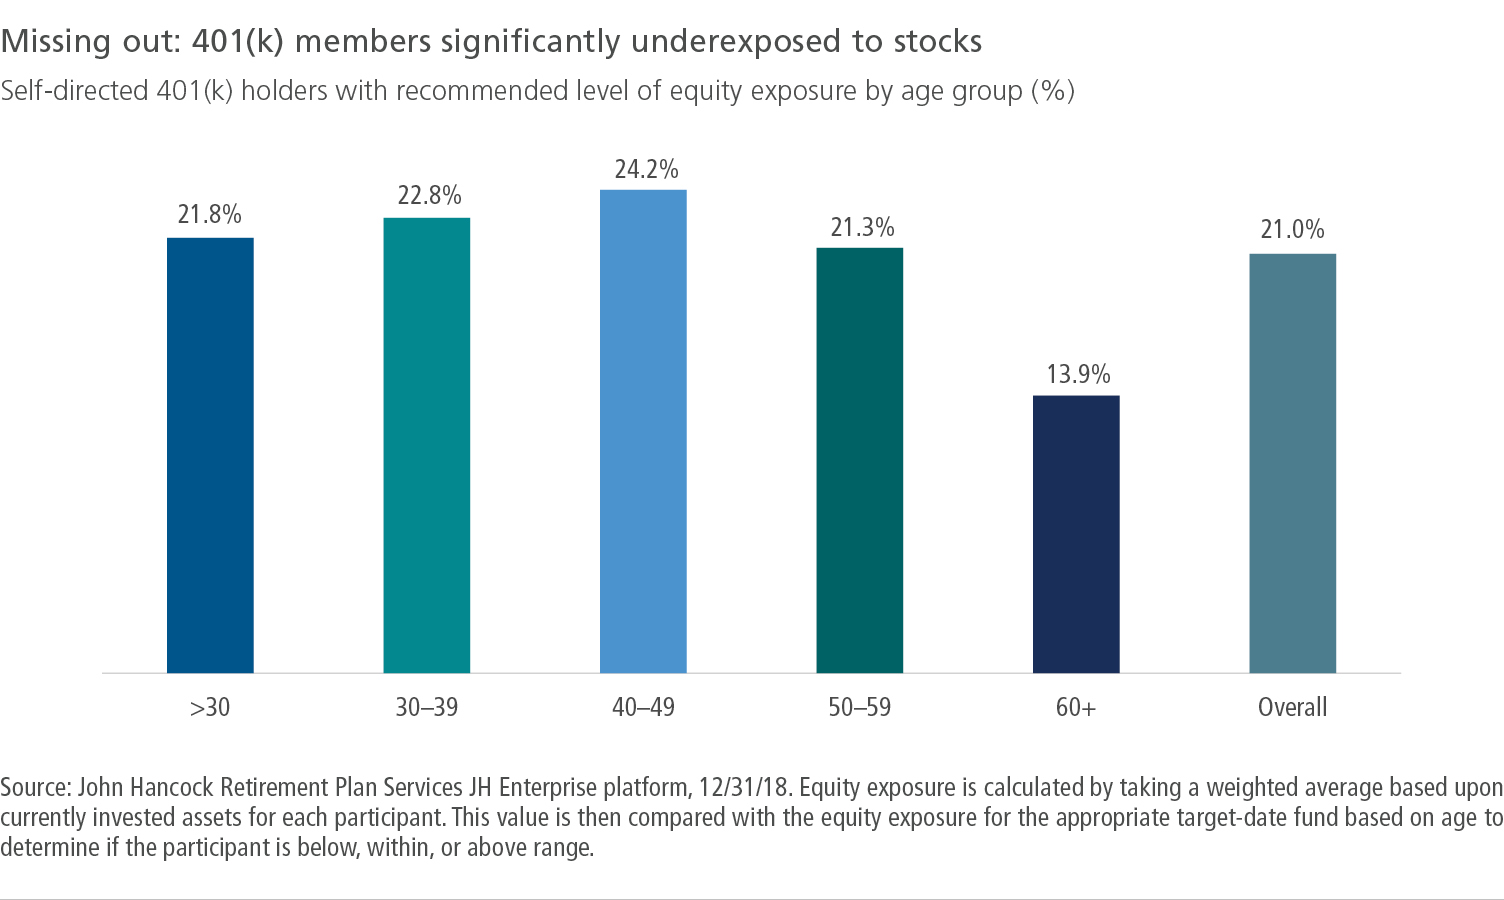 Missing out: 401(k) members significantly underexposed to stocks